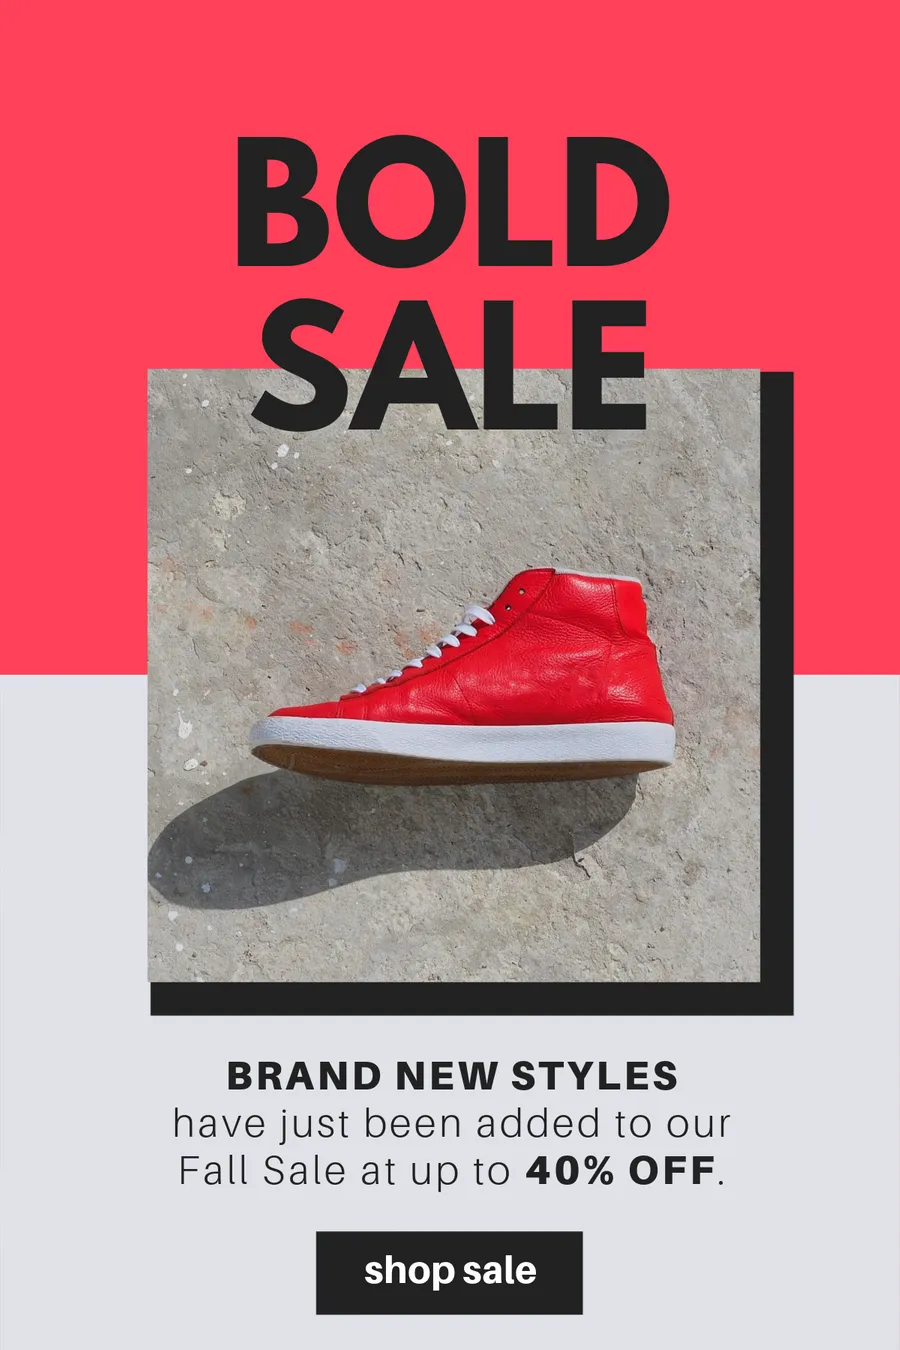 Bold Sale email template